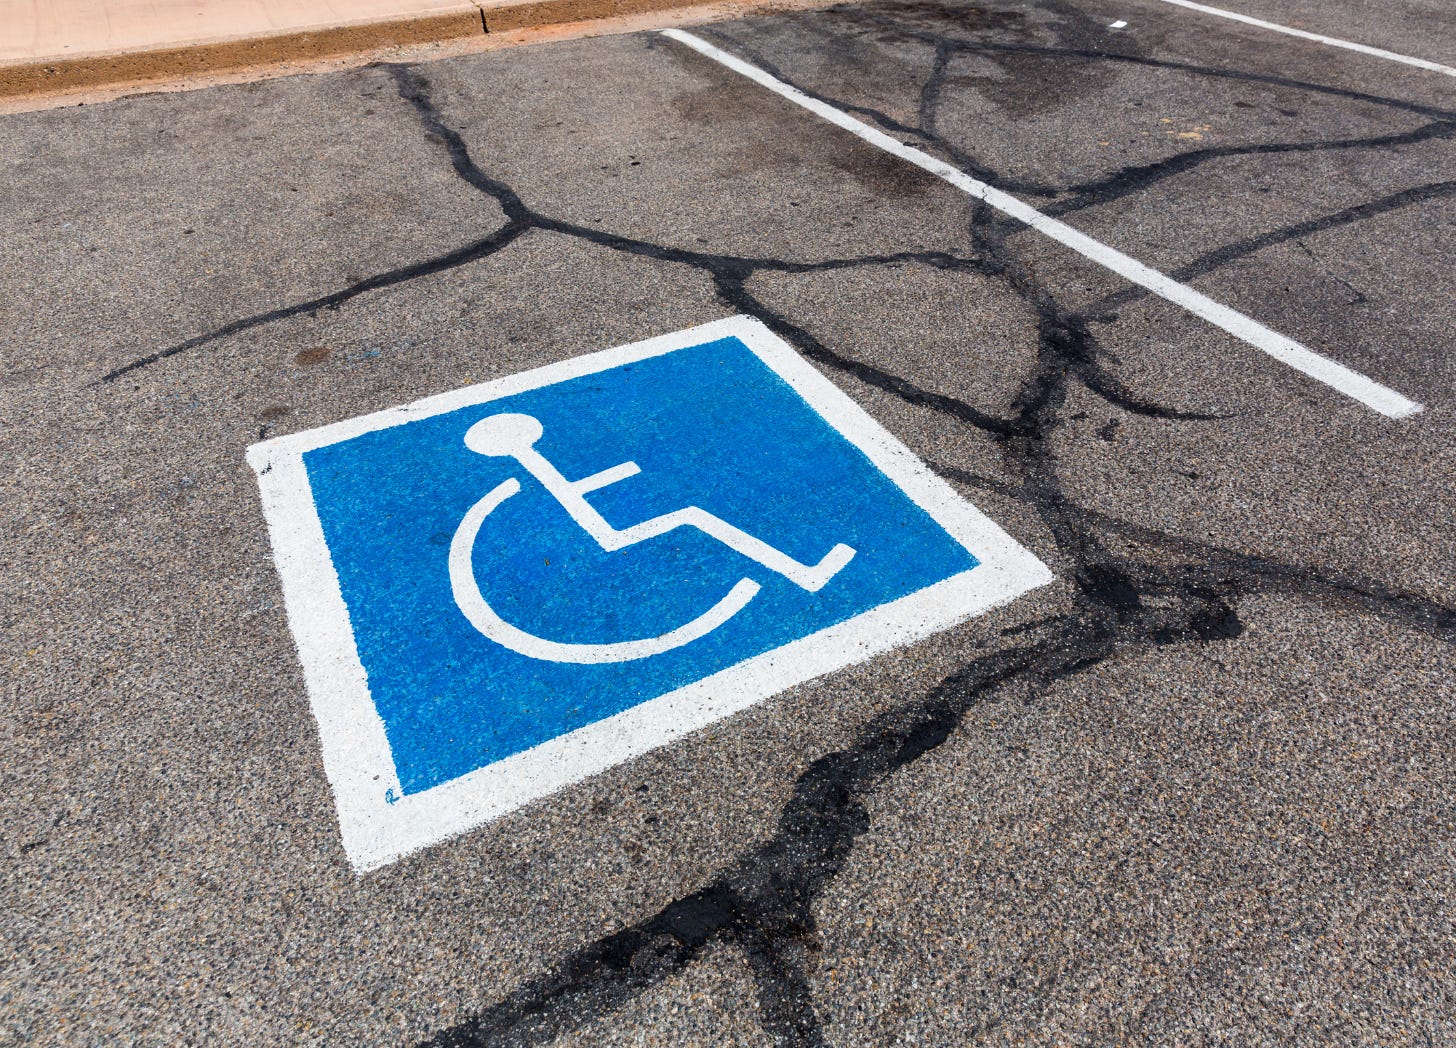 Wheelchair symbol painted onto pavement marking accessible parking